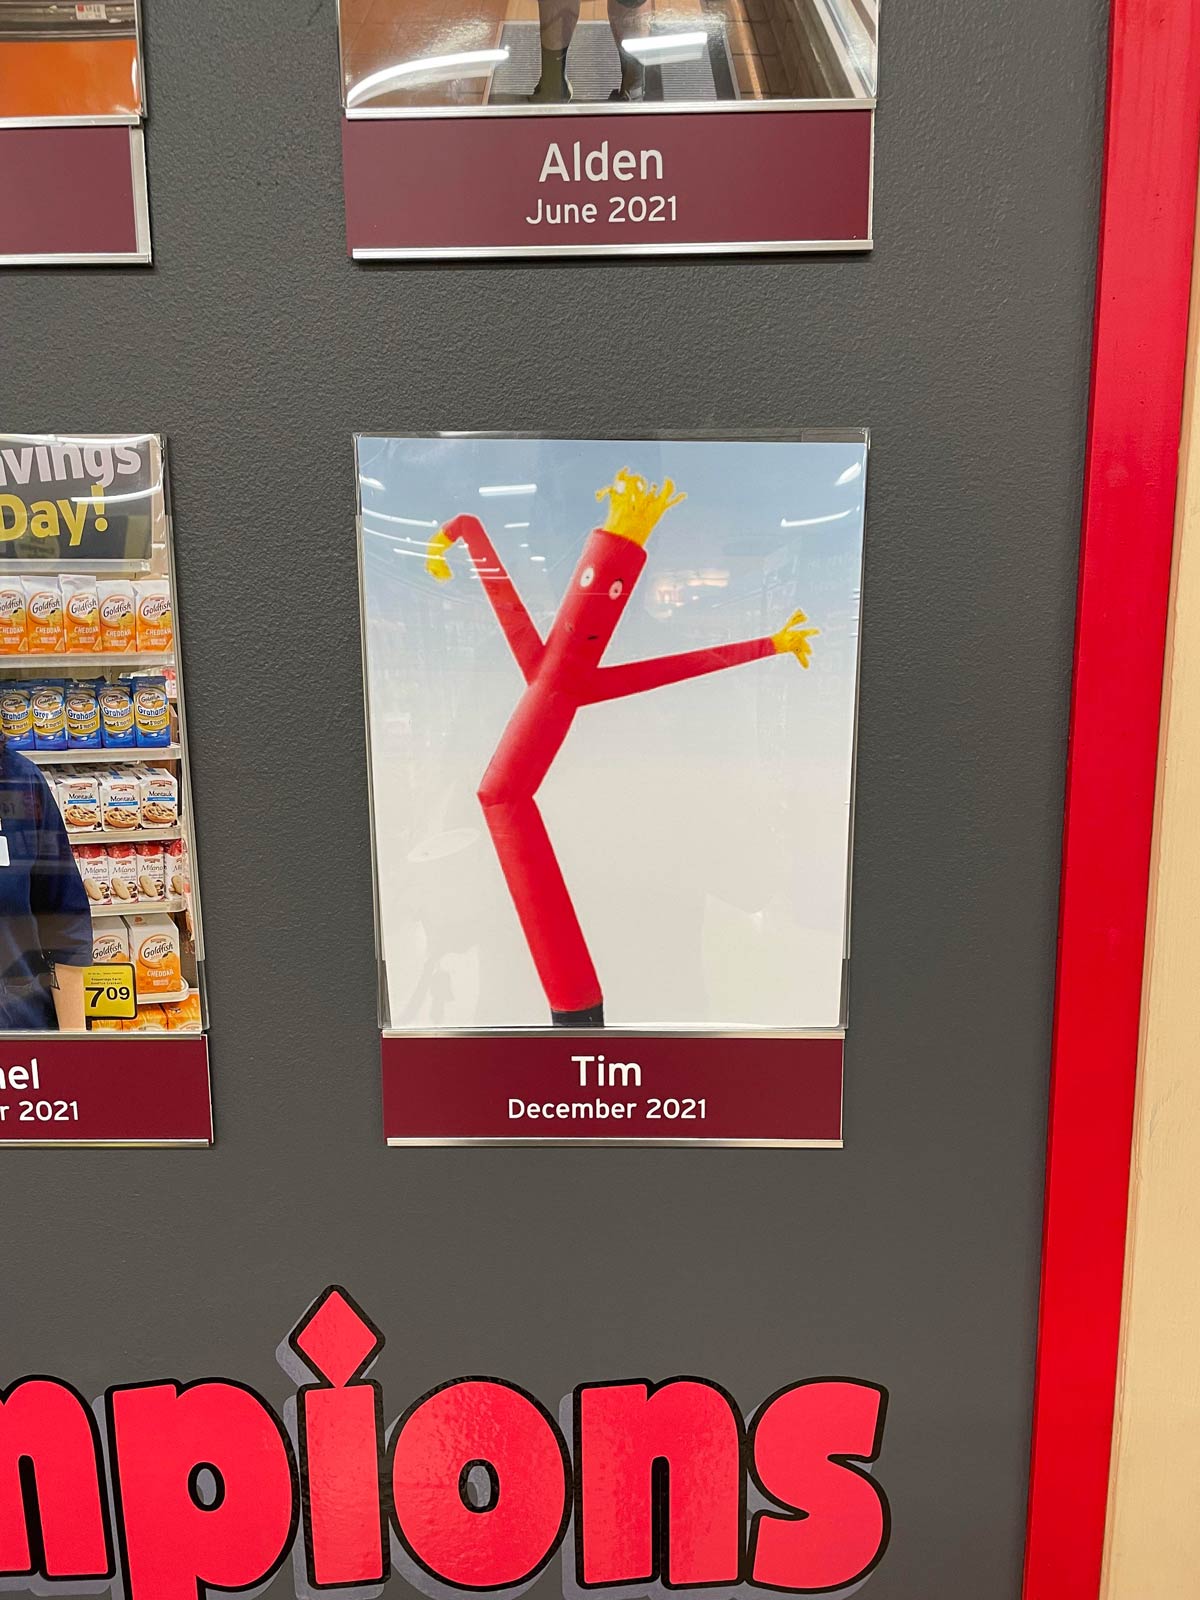 Tim getting the recognition he deserves at work. Employee of the month!